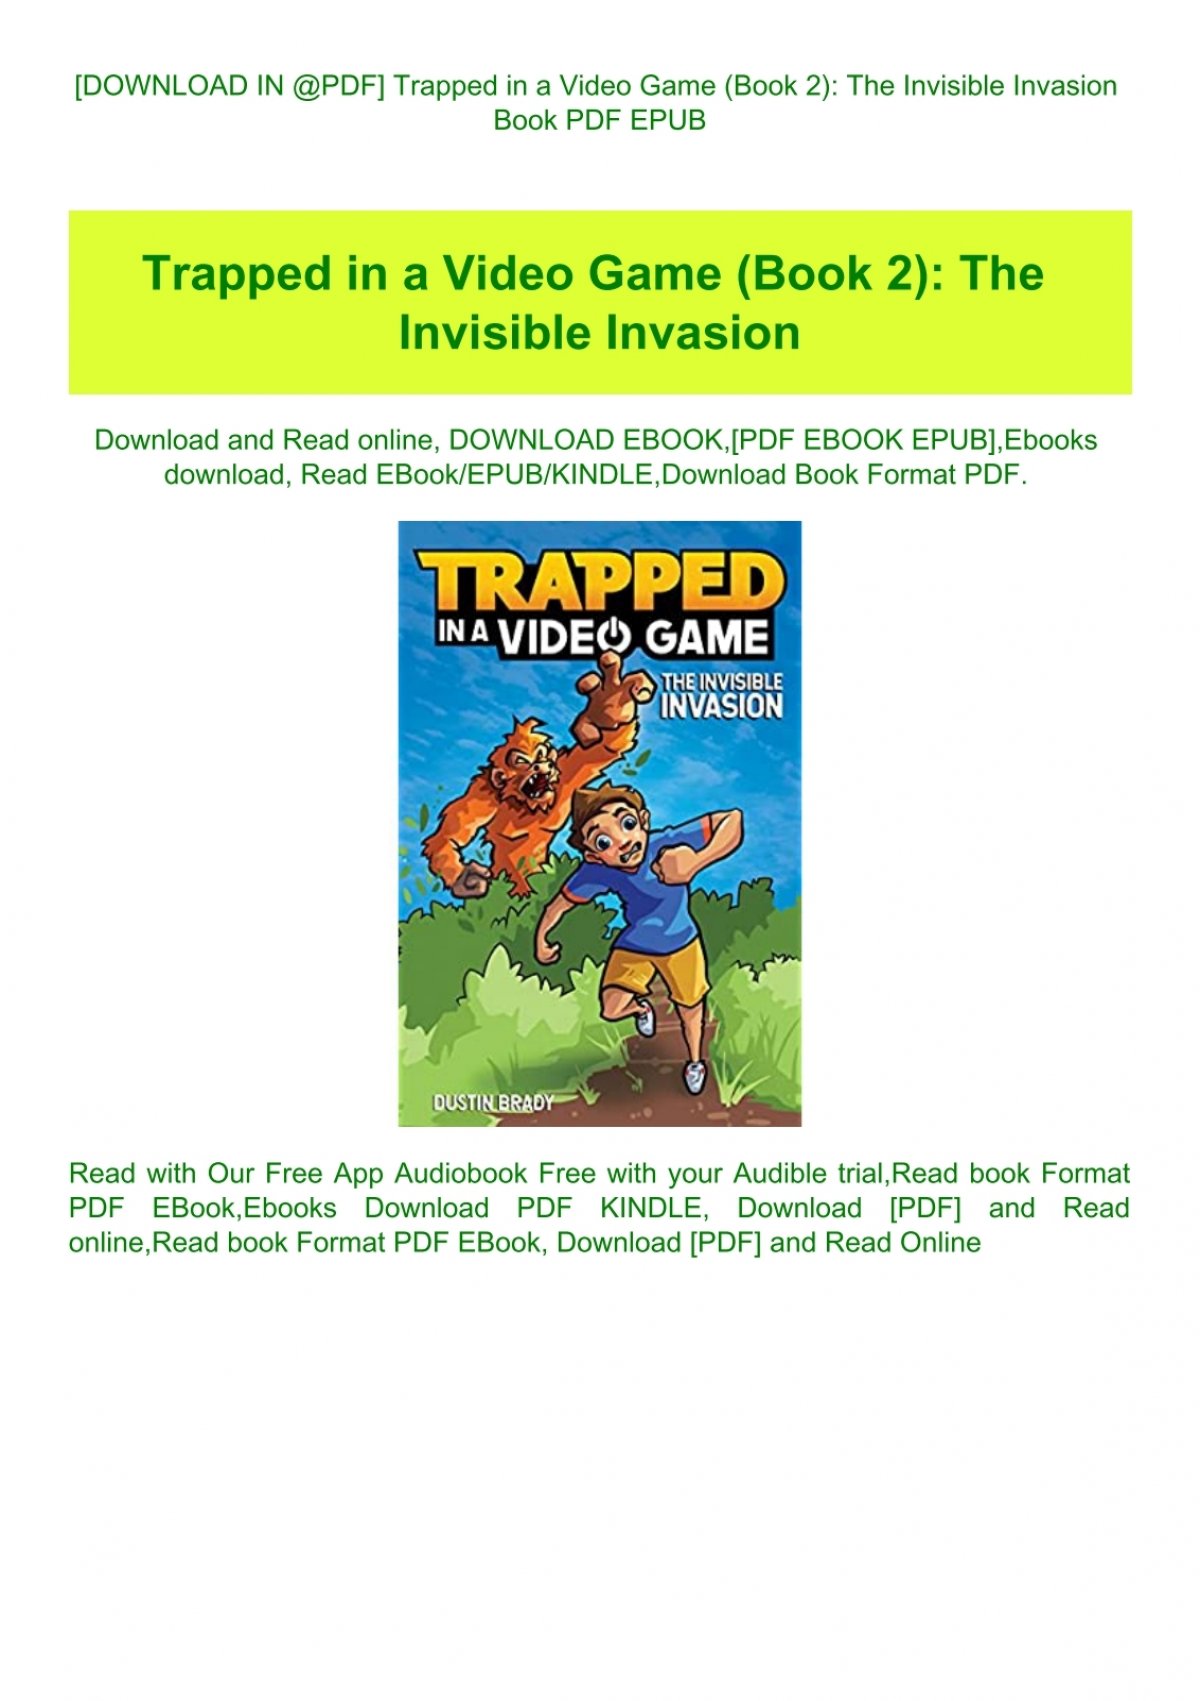 Download In Pdf Trapped In A Video Game Book 2 The Invisible Invasion Book Pdf Epub